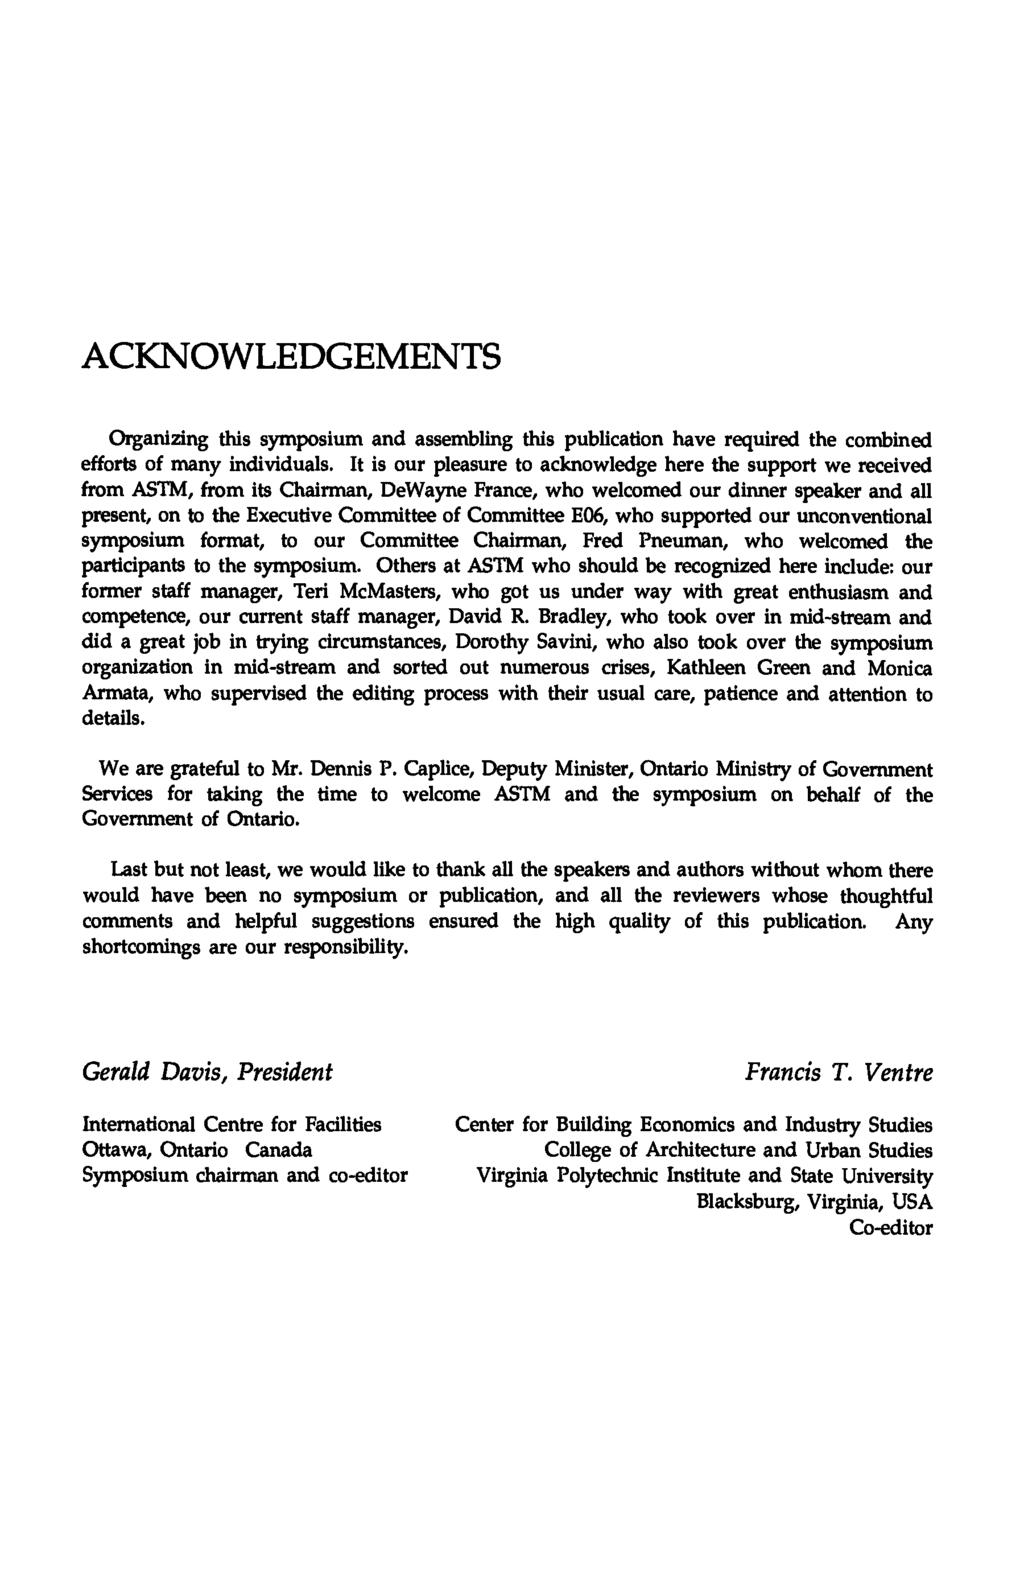 ACKNOWLEDGEMENTS Organizing this symposium and assembling this publication have required the combined efforts of many individuals.